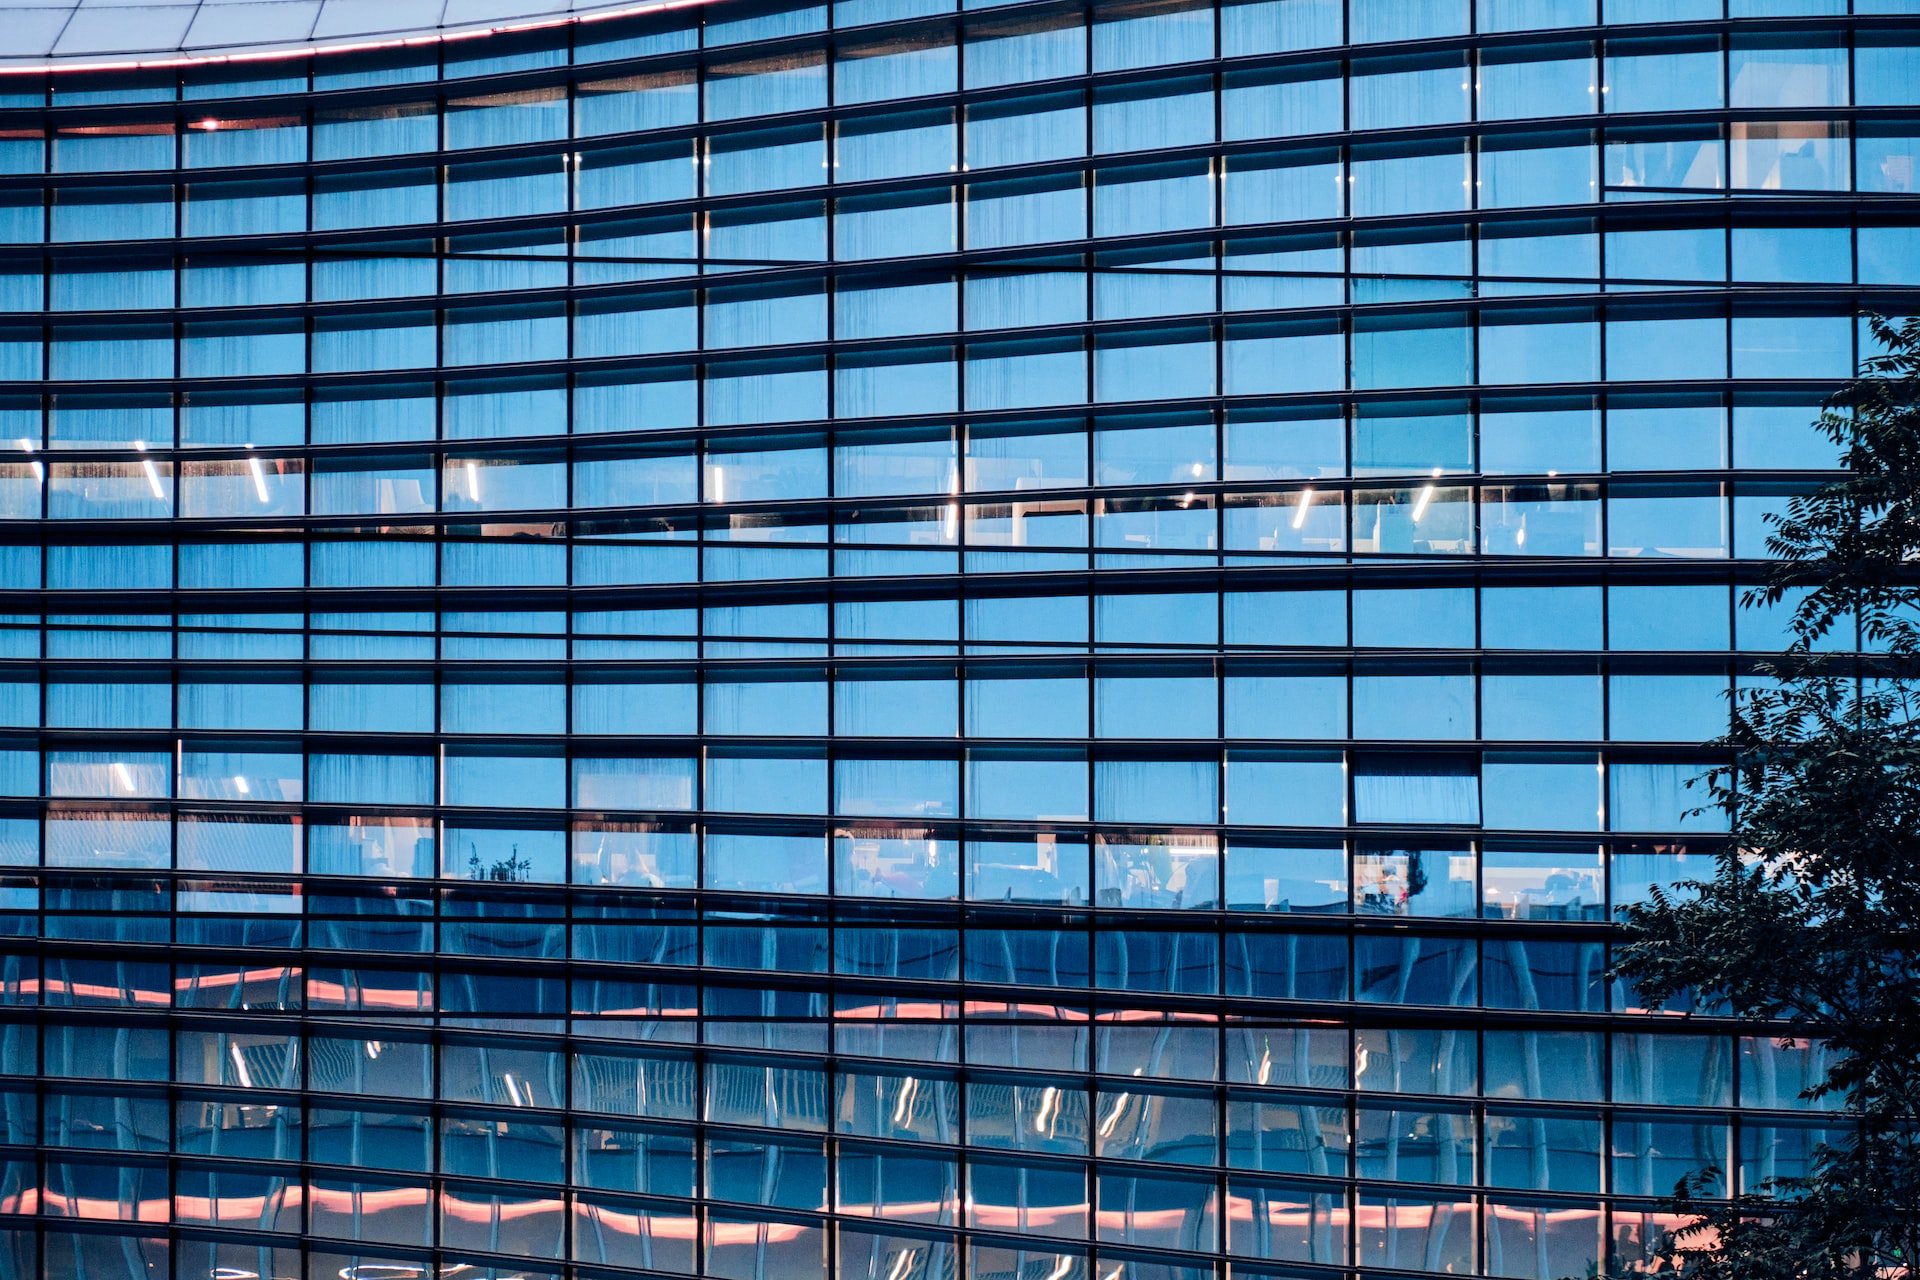 Rectangular glass panels of reflecting blue colors of the SINA building in Beijing, China